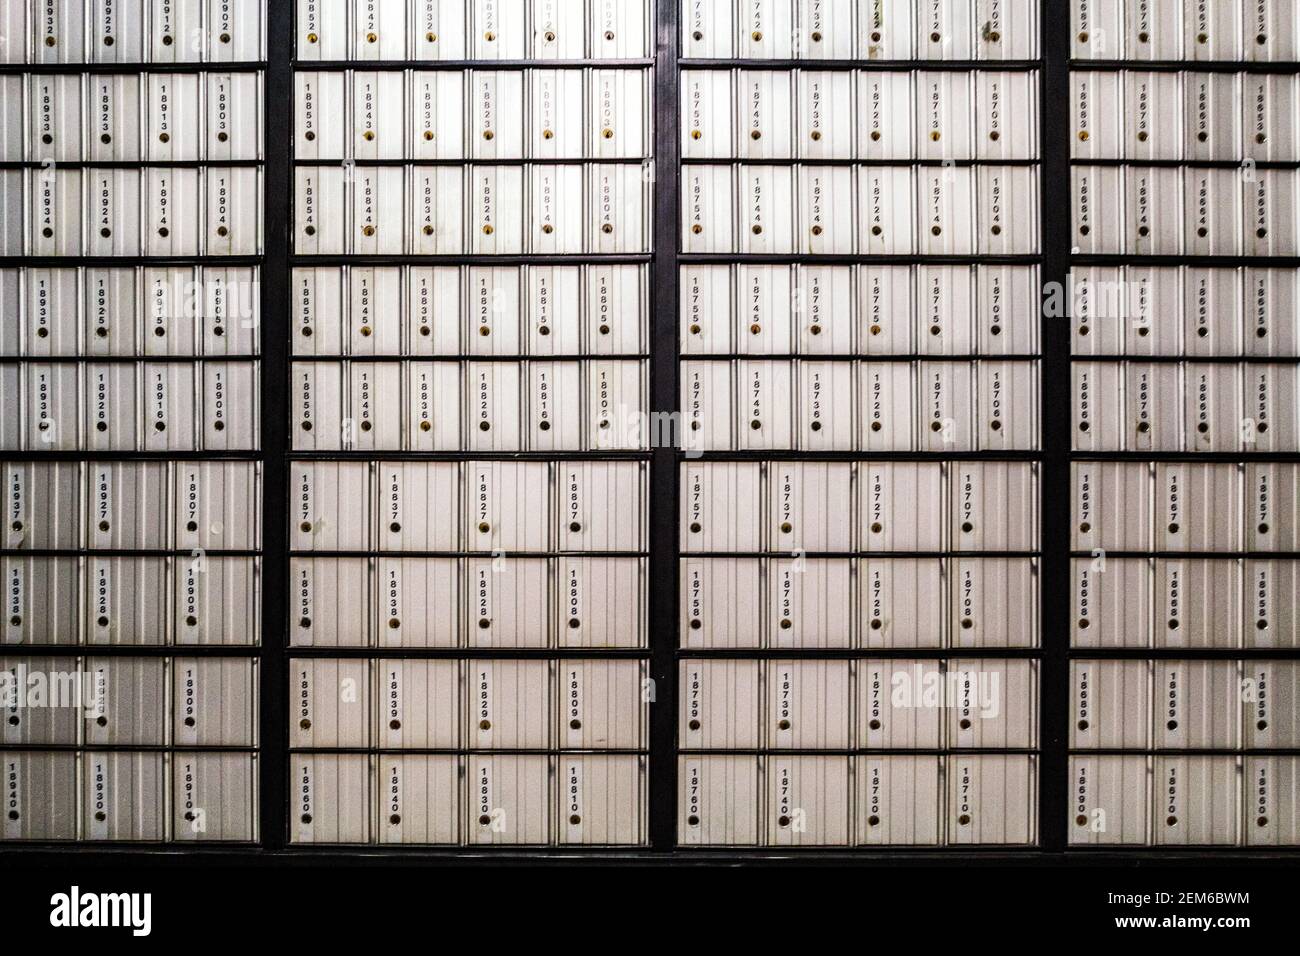 Post office boxes on a wall create a grid of lines at a branch of the United States Postal Service. Stock Photo